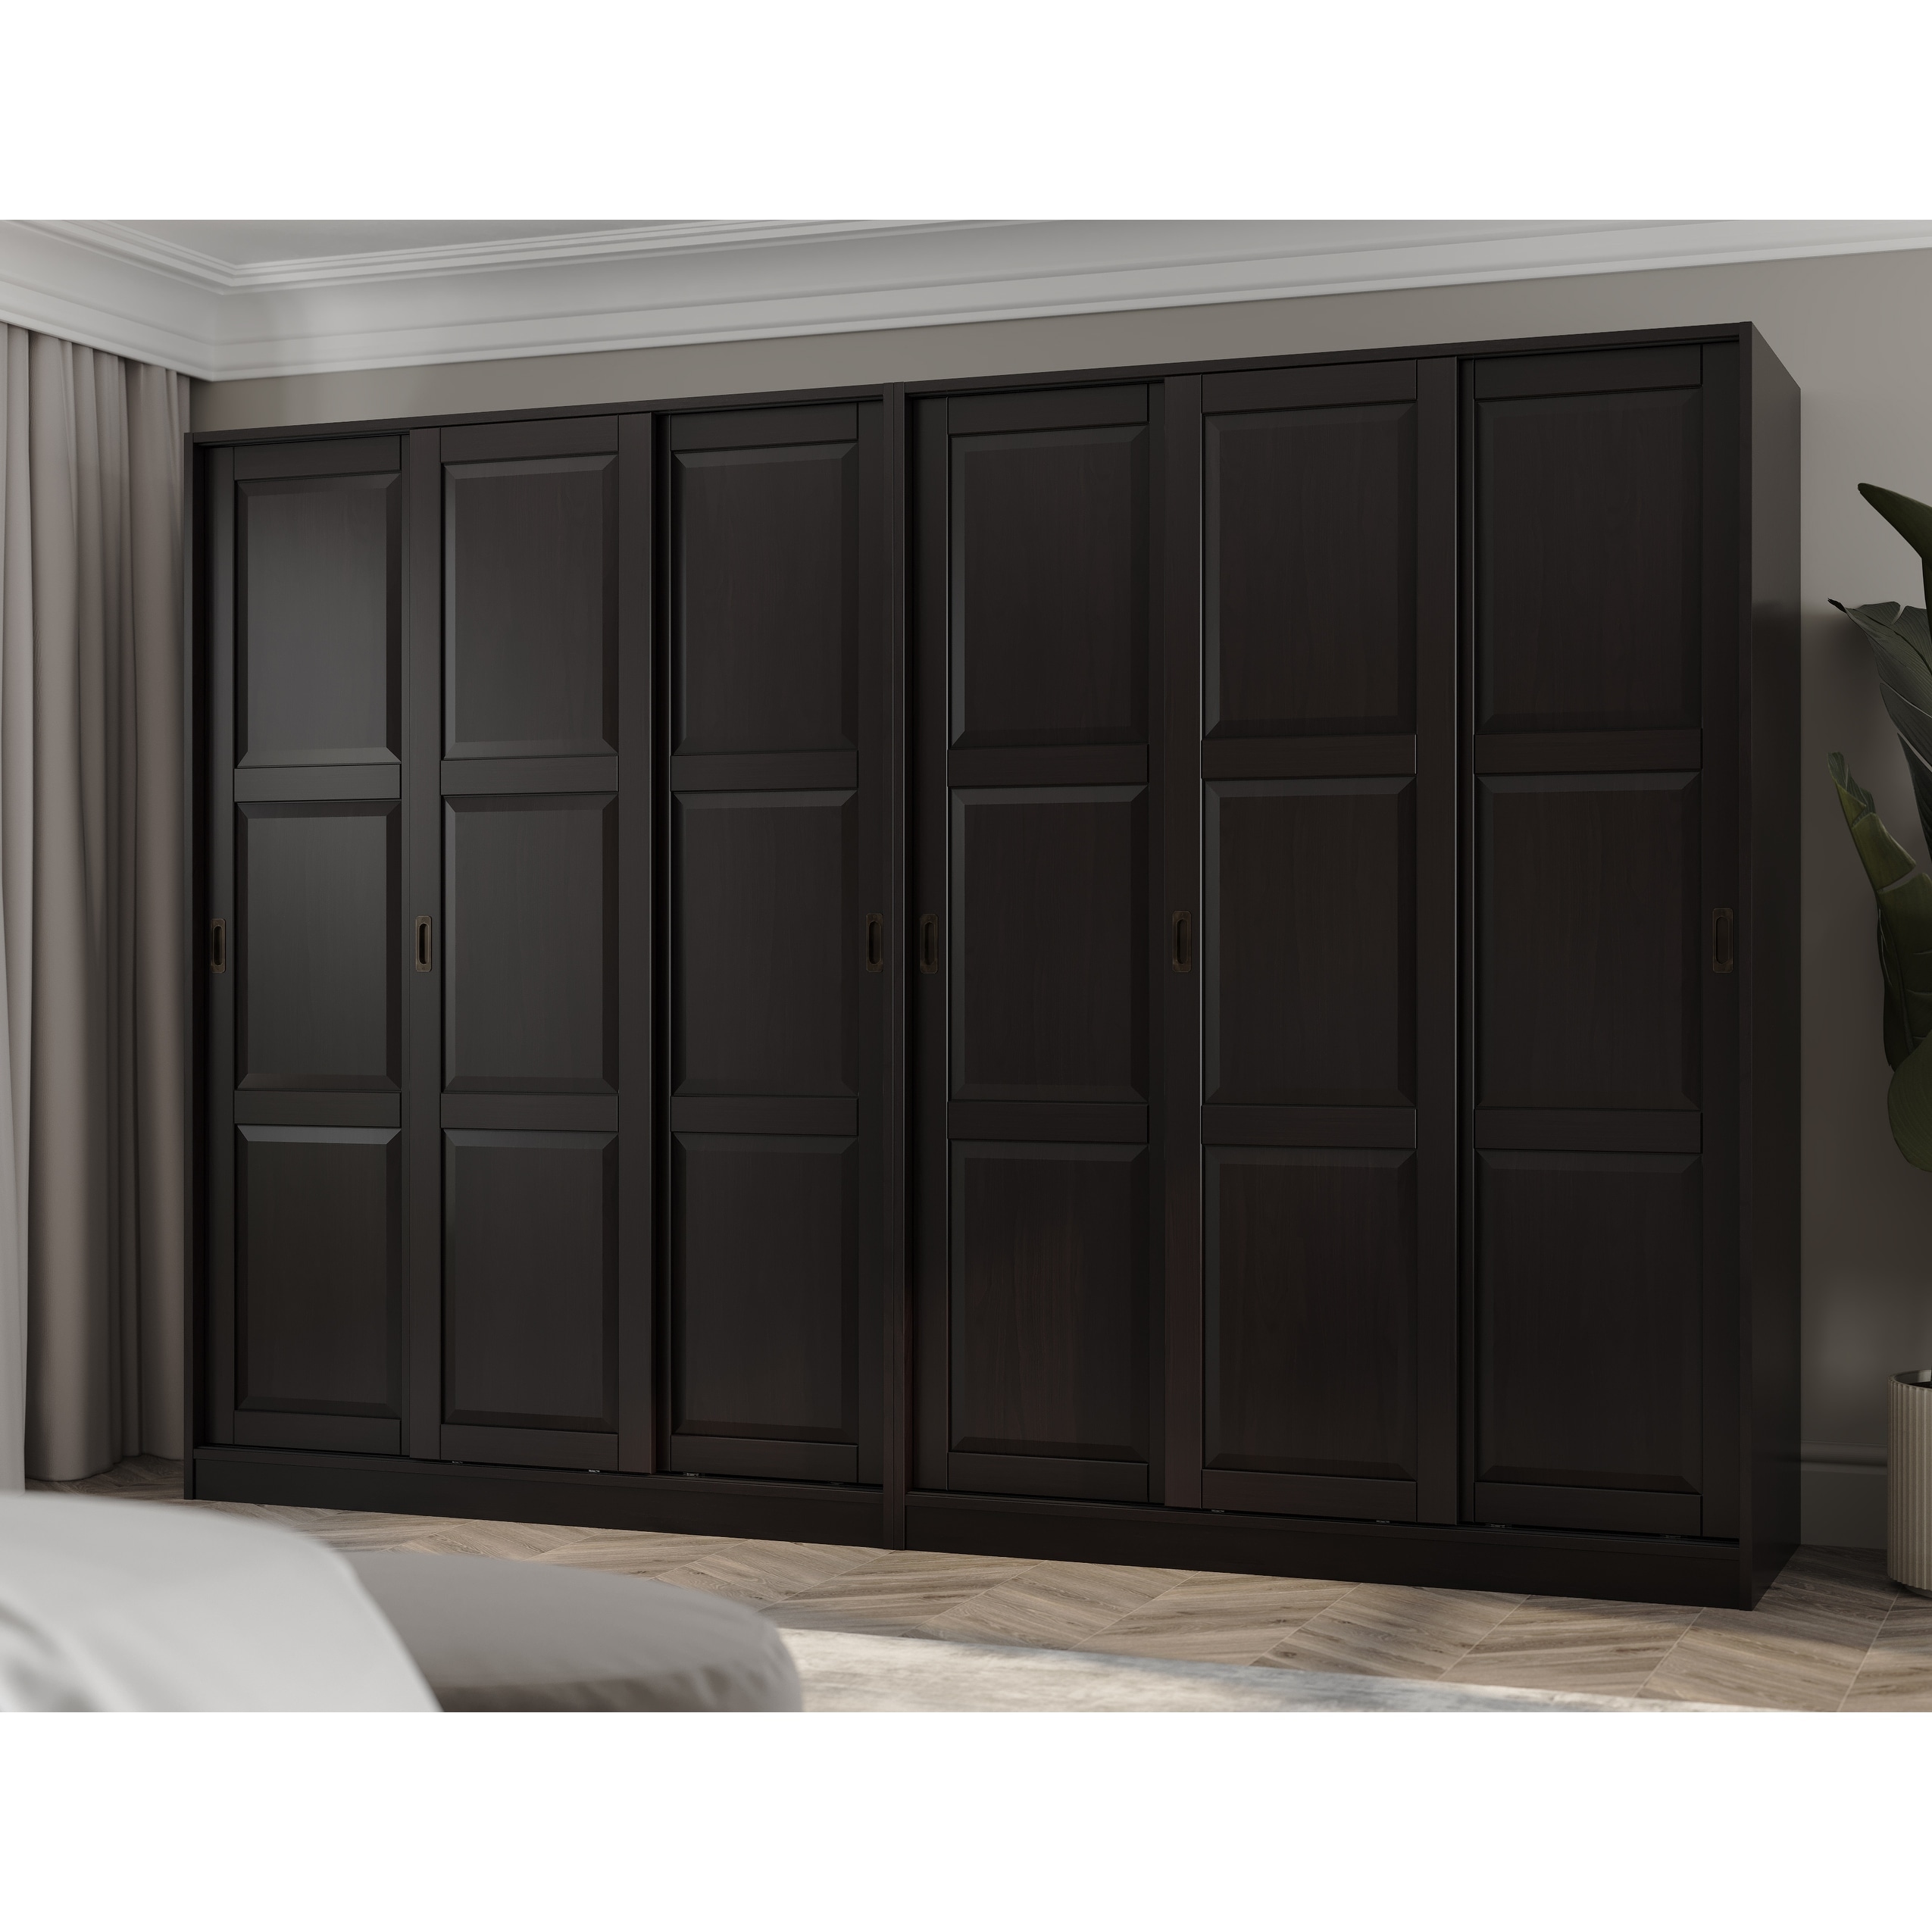 https://ak1.ostkcdn.com/images/products/is/images/direct/2d1e17a49bc2d6dae7b8311bfa13773a3b3d15ea/Palace-Imports-100%25-Solid-Wood-Wall-Closet-System-of-Wardrobe-Armoires-with-Mirrored%2C-Louvered-or-Raised-Panel-Sliding-Doors.jpg